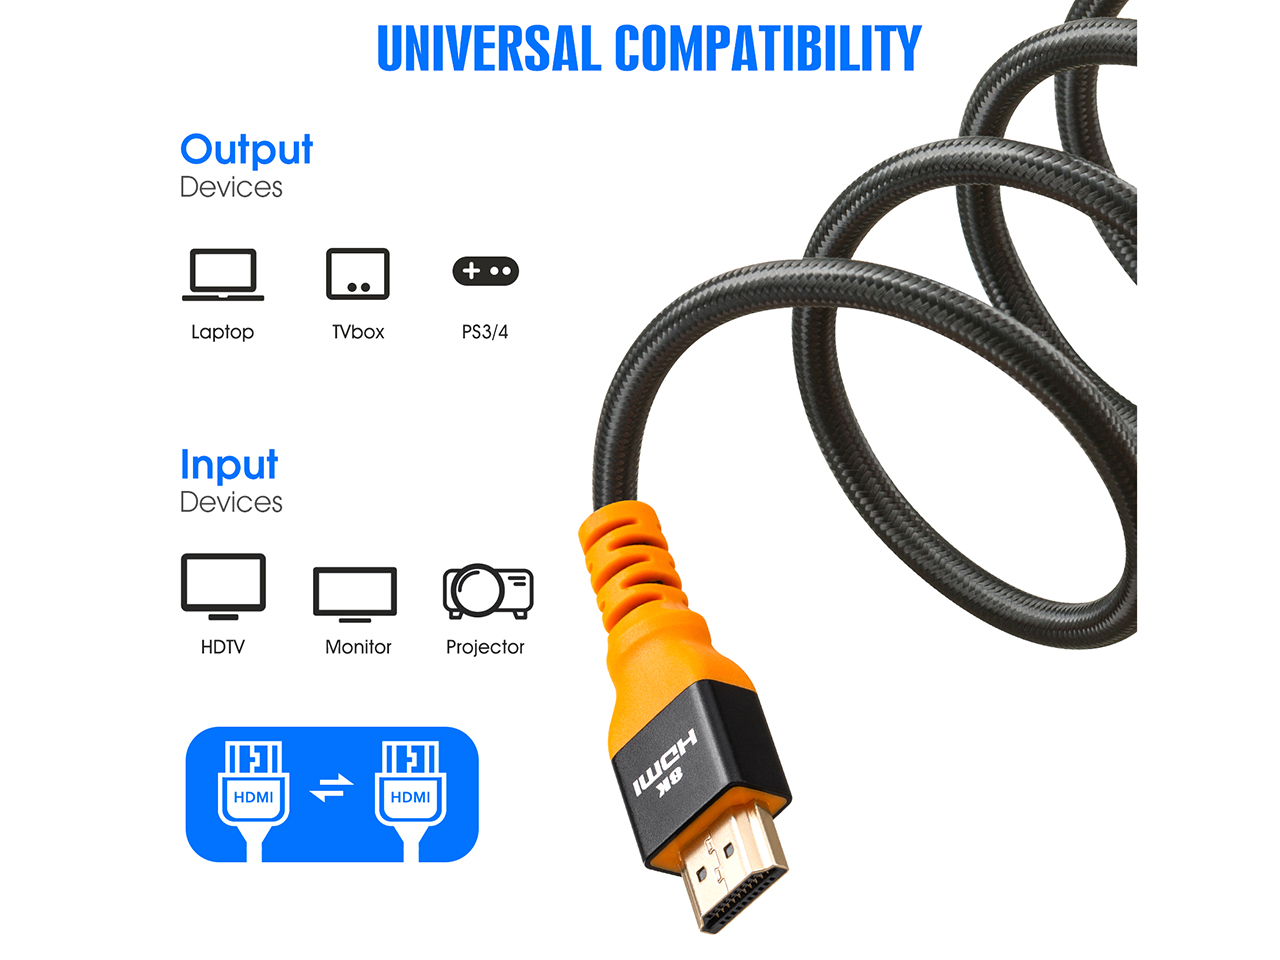 8k Hdmi Cable 10ft Ixever Ultra Hd High Speed 48gpbs Hdmi 2 1 Cable 8k 60hz 4k 144hz Earc Hdr10 Hdcp 2 2 Compatible With Dolby Vision Xbox Ps4 Ps5 Apple Tv 4k Roku Fire Tv